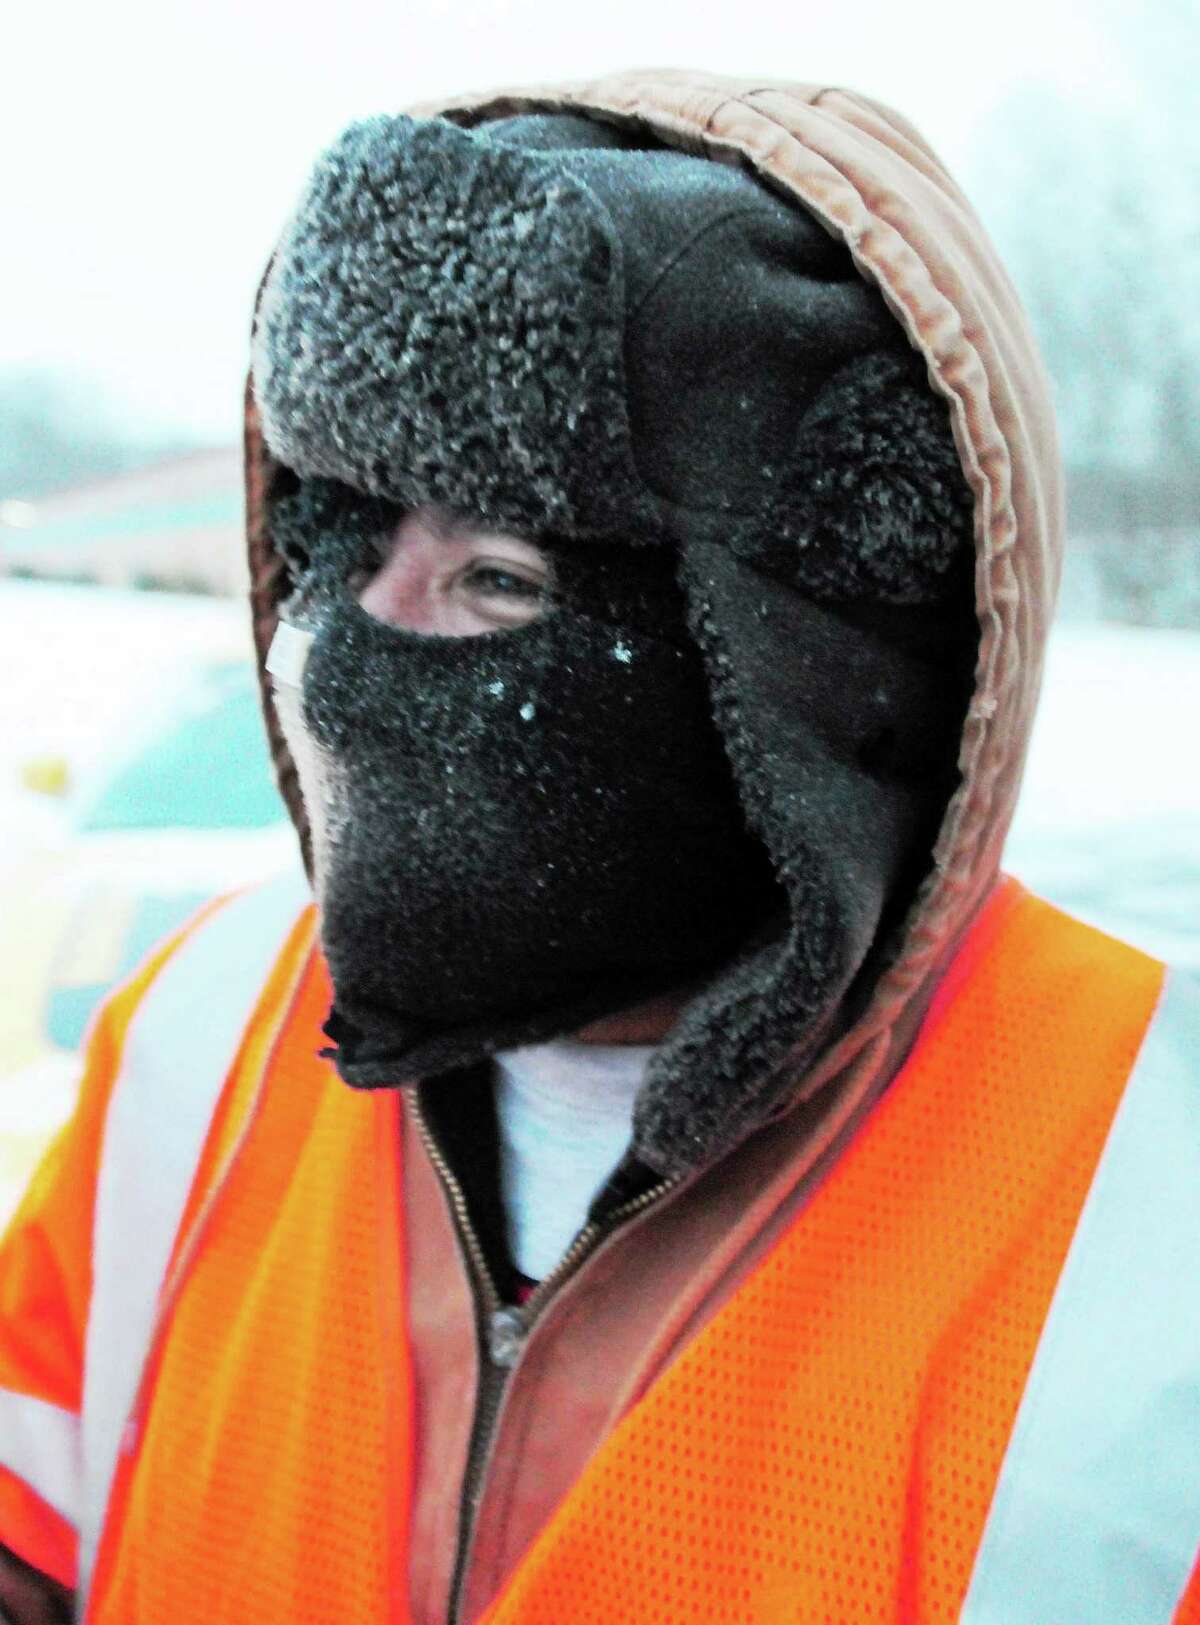 (Photo by Peter Hvizdak ó New Haven Register) An employees for DeMars Landscaping of Branford faces the cold with warm head gear as he shovels snow in a shopping plaza at 365 East Main Street Friday morning, January 3, 2014 .